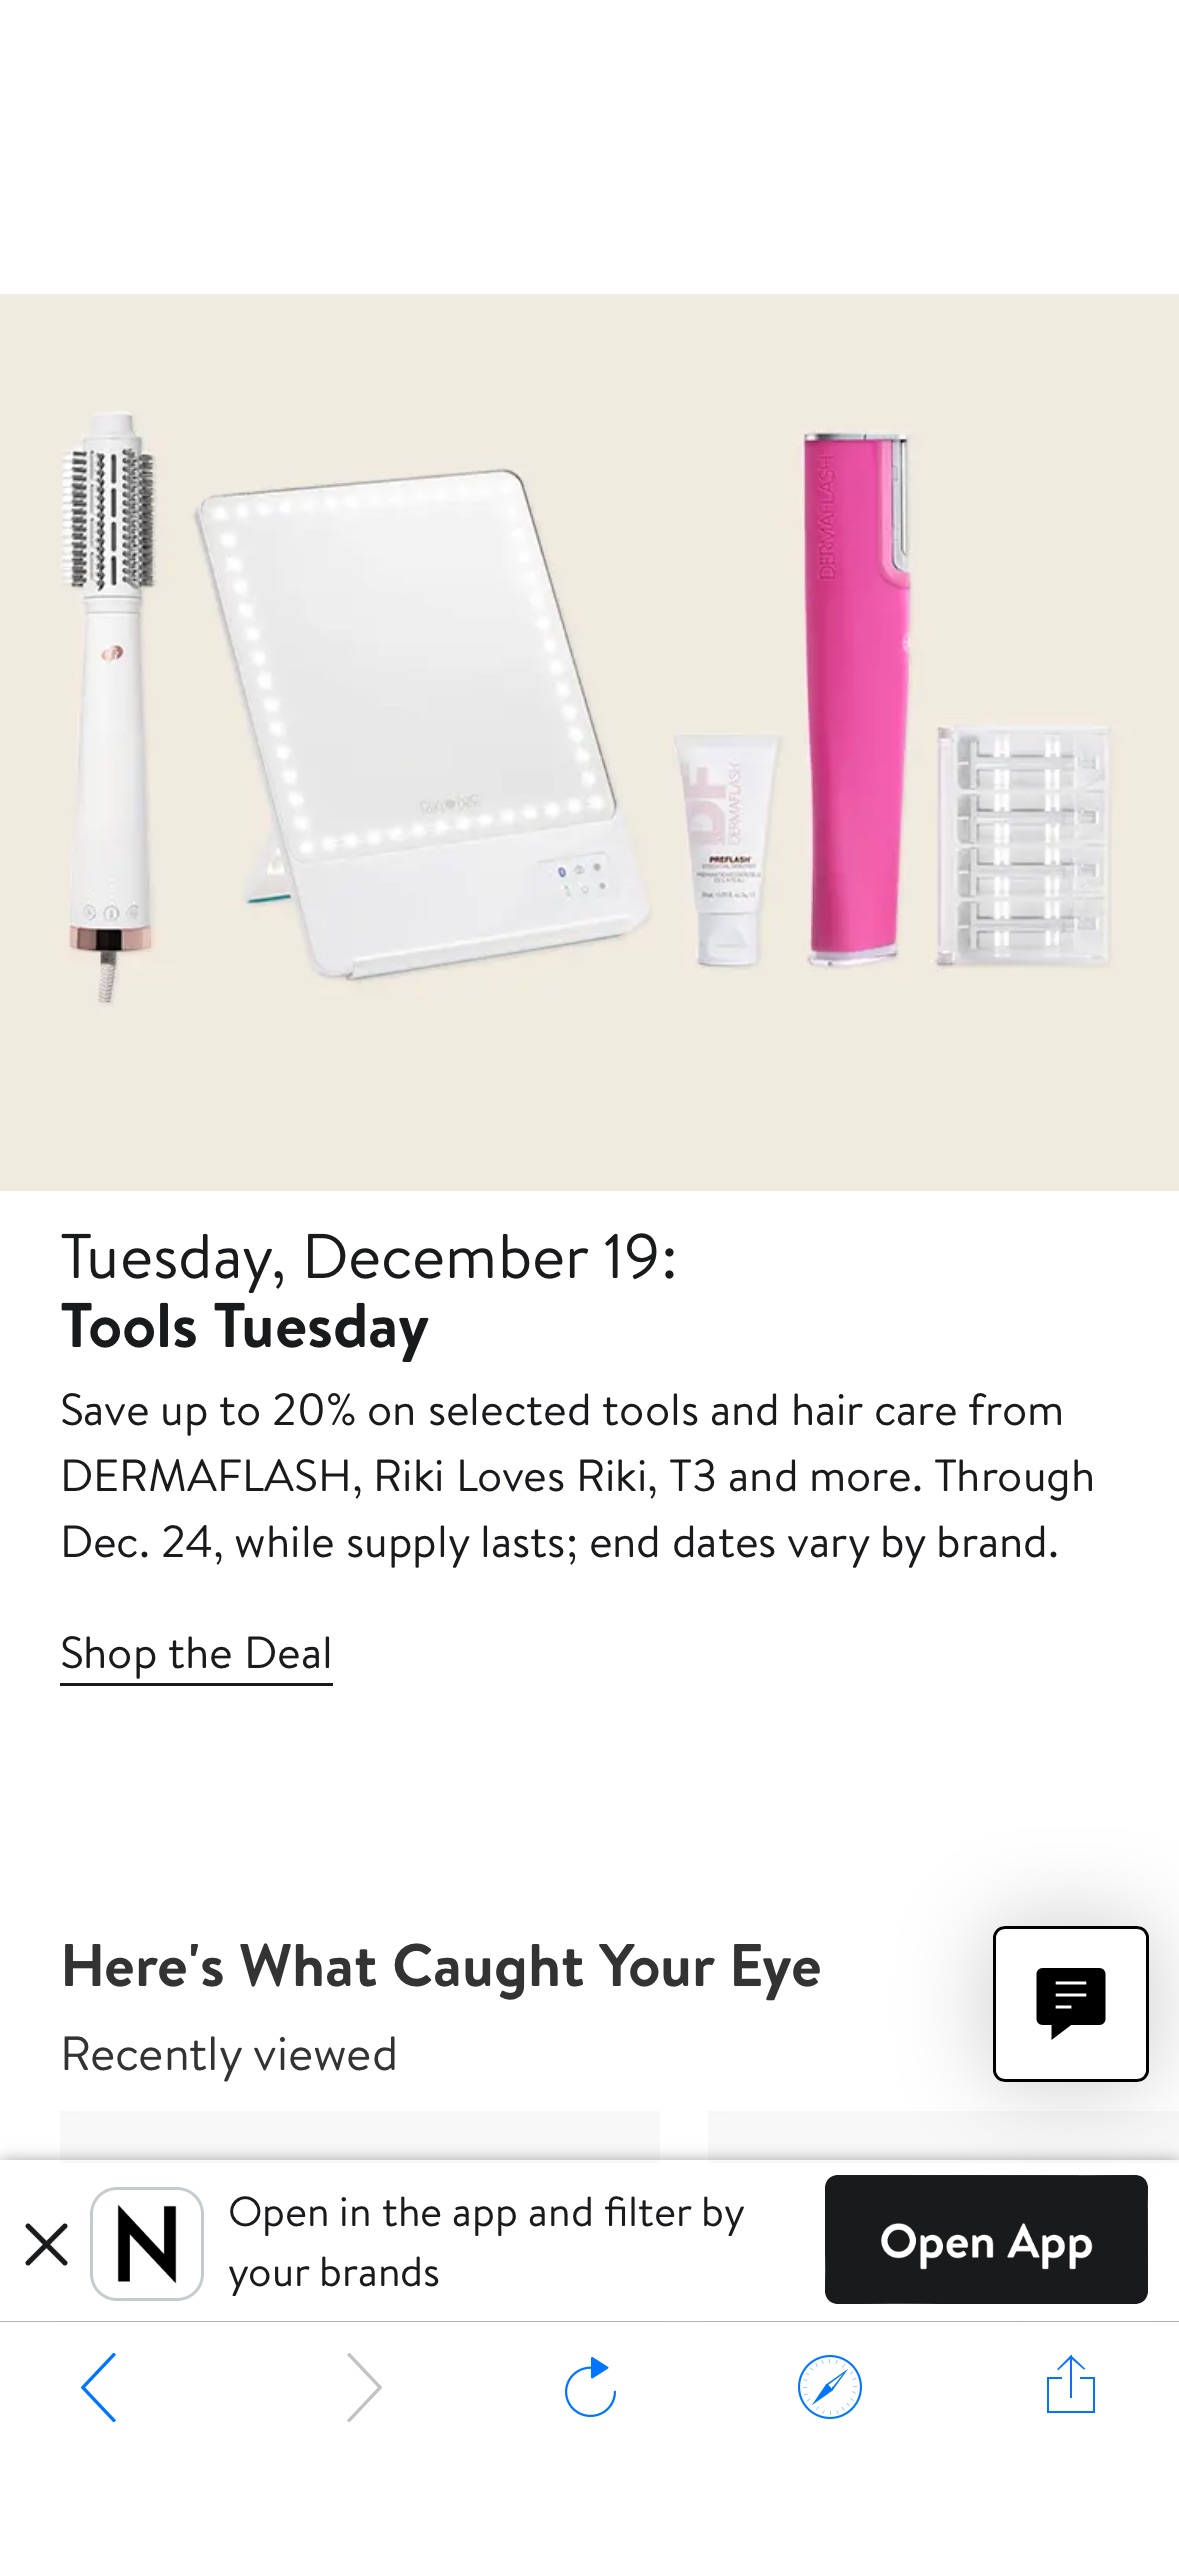 Save up to 20% on selected tools and hair care from DERMAFLASH, Riki Loves Riki, T3 and more. Through Dec. 24,